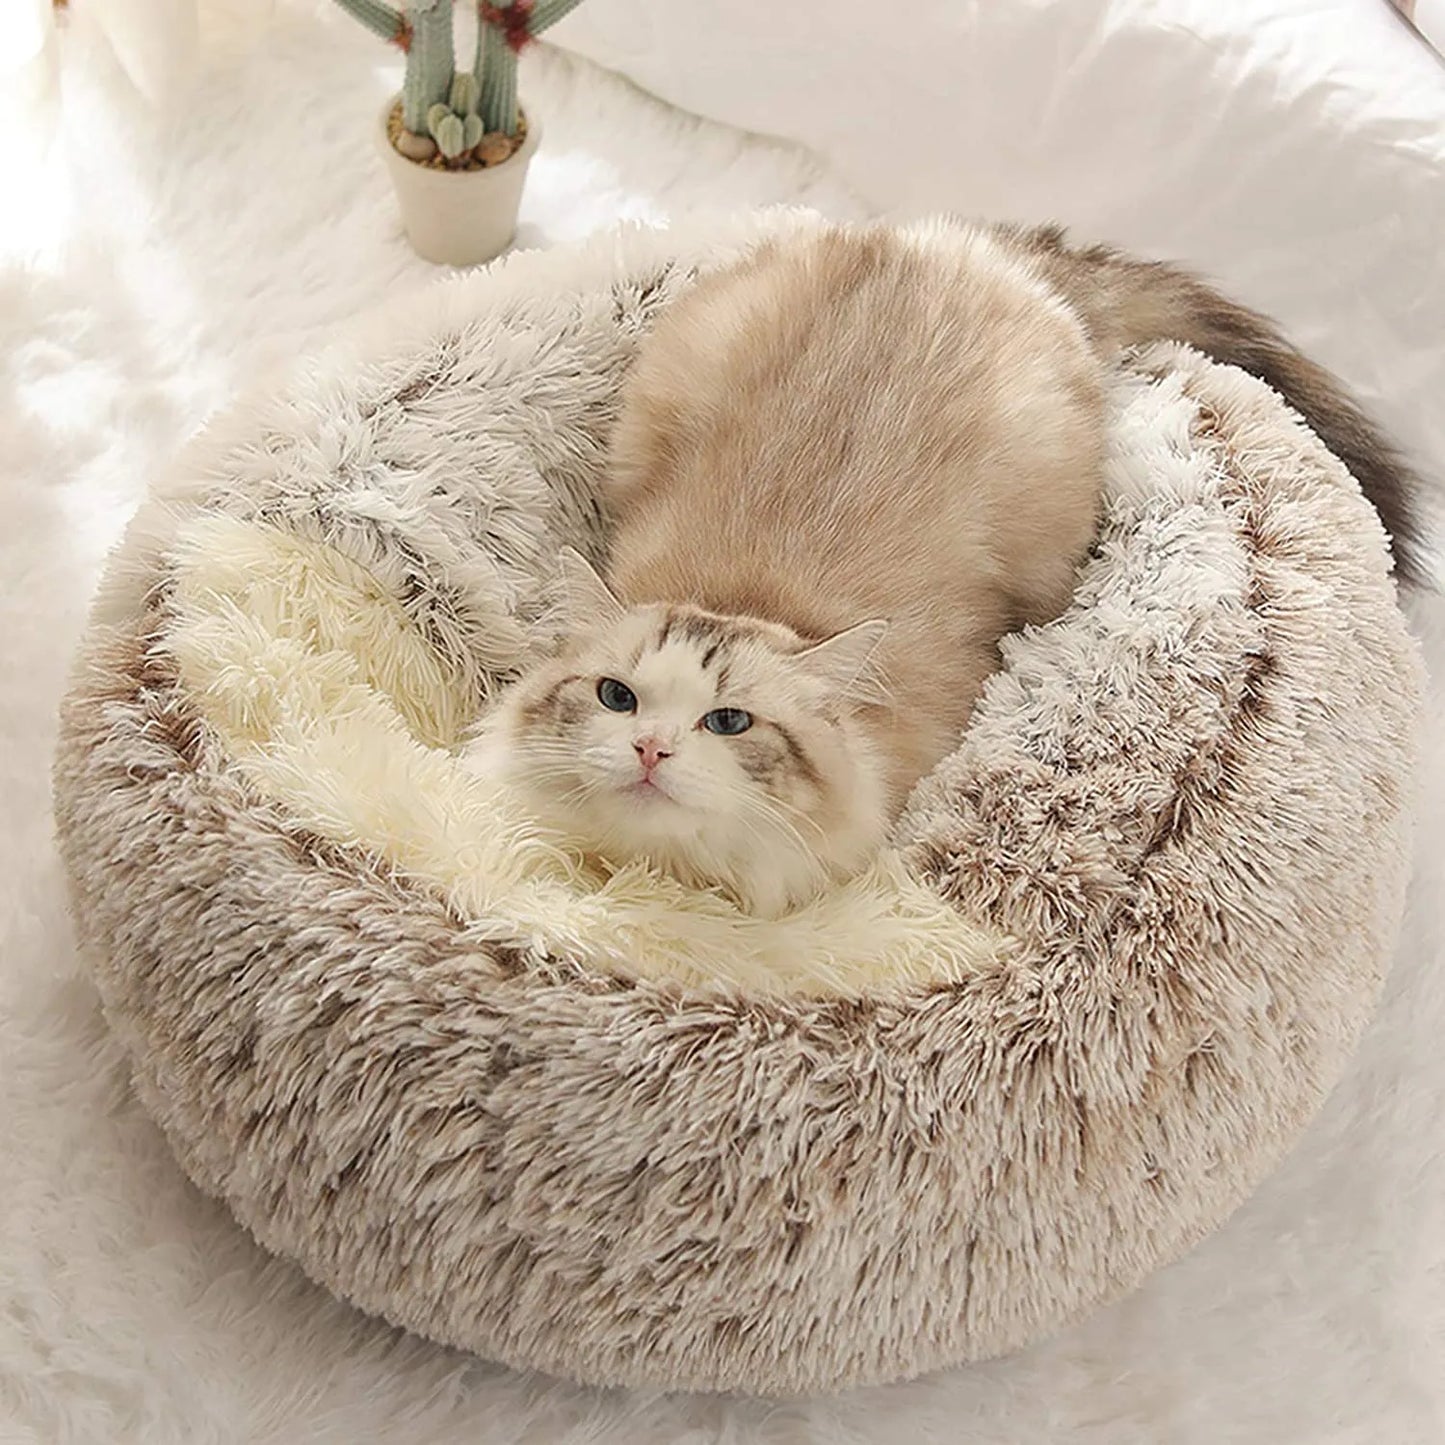 New Pet Dog Cat Round Plush Bed Semi-enclosed Cat Nest for Deep Sleep Comfort in Winter Cats Bed little Mat Basket Soft Kennel